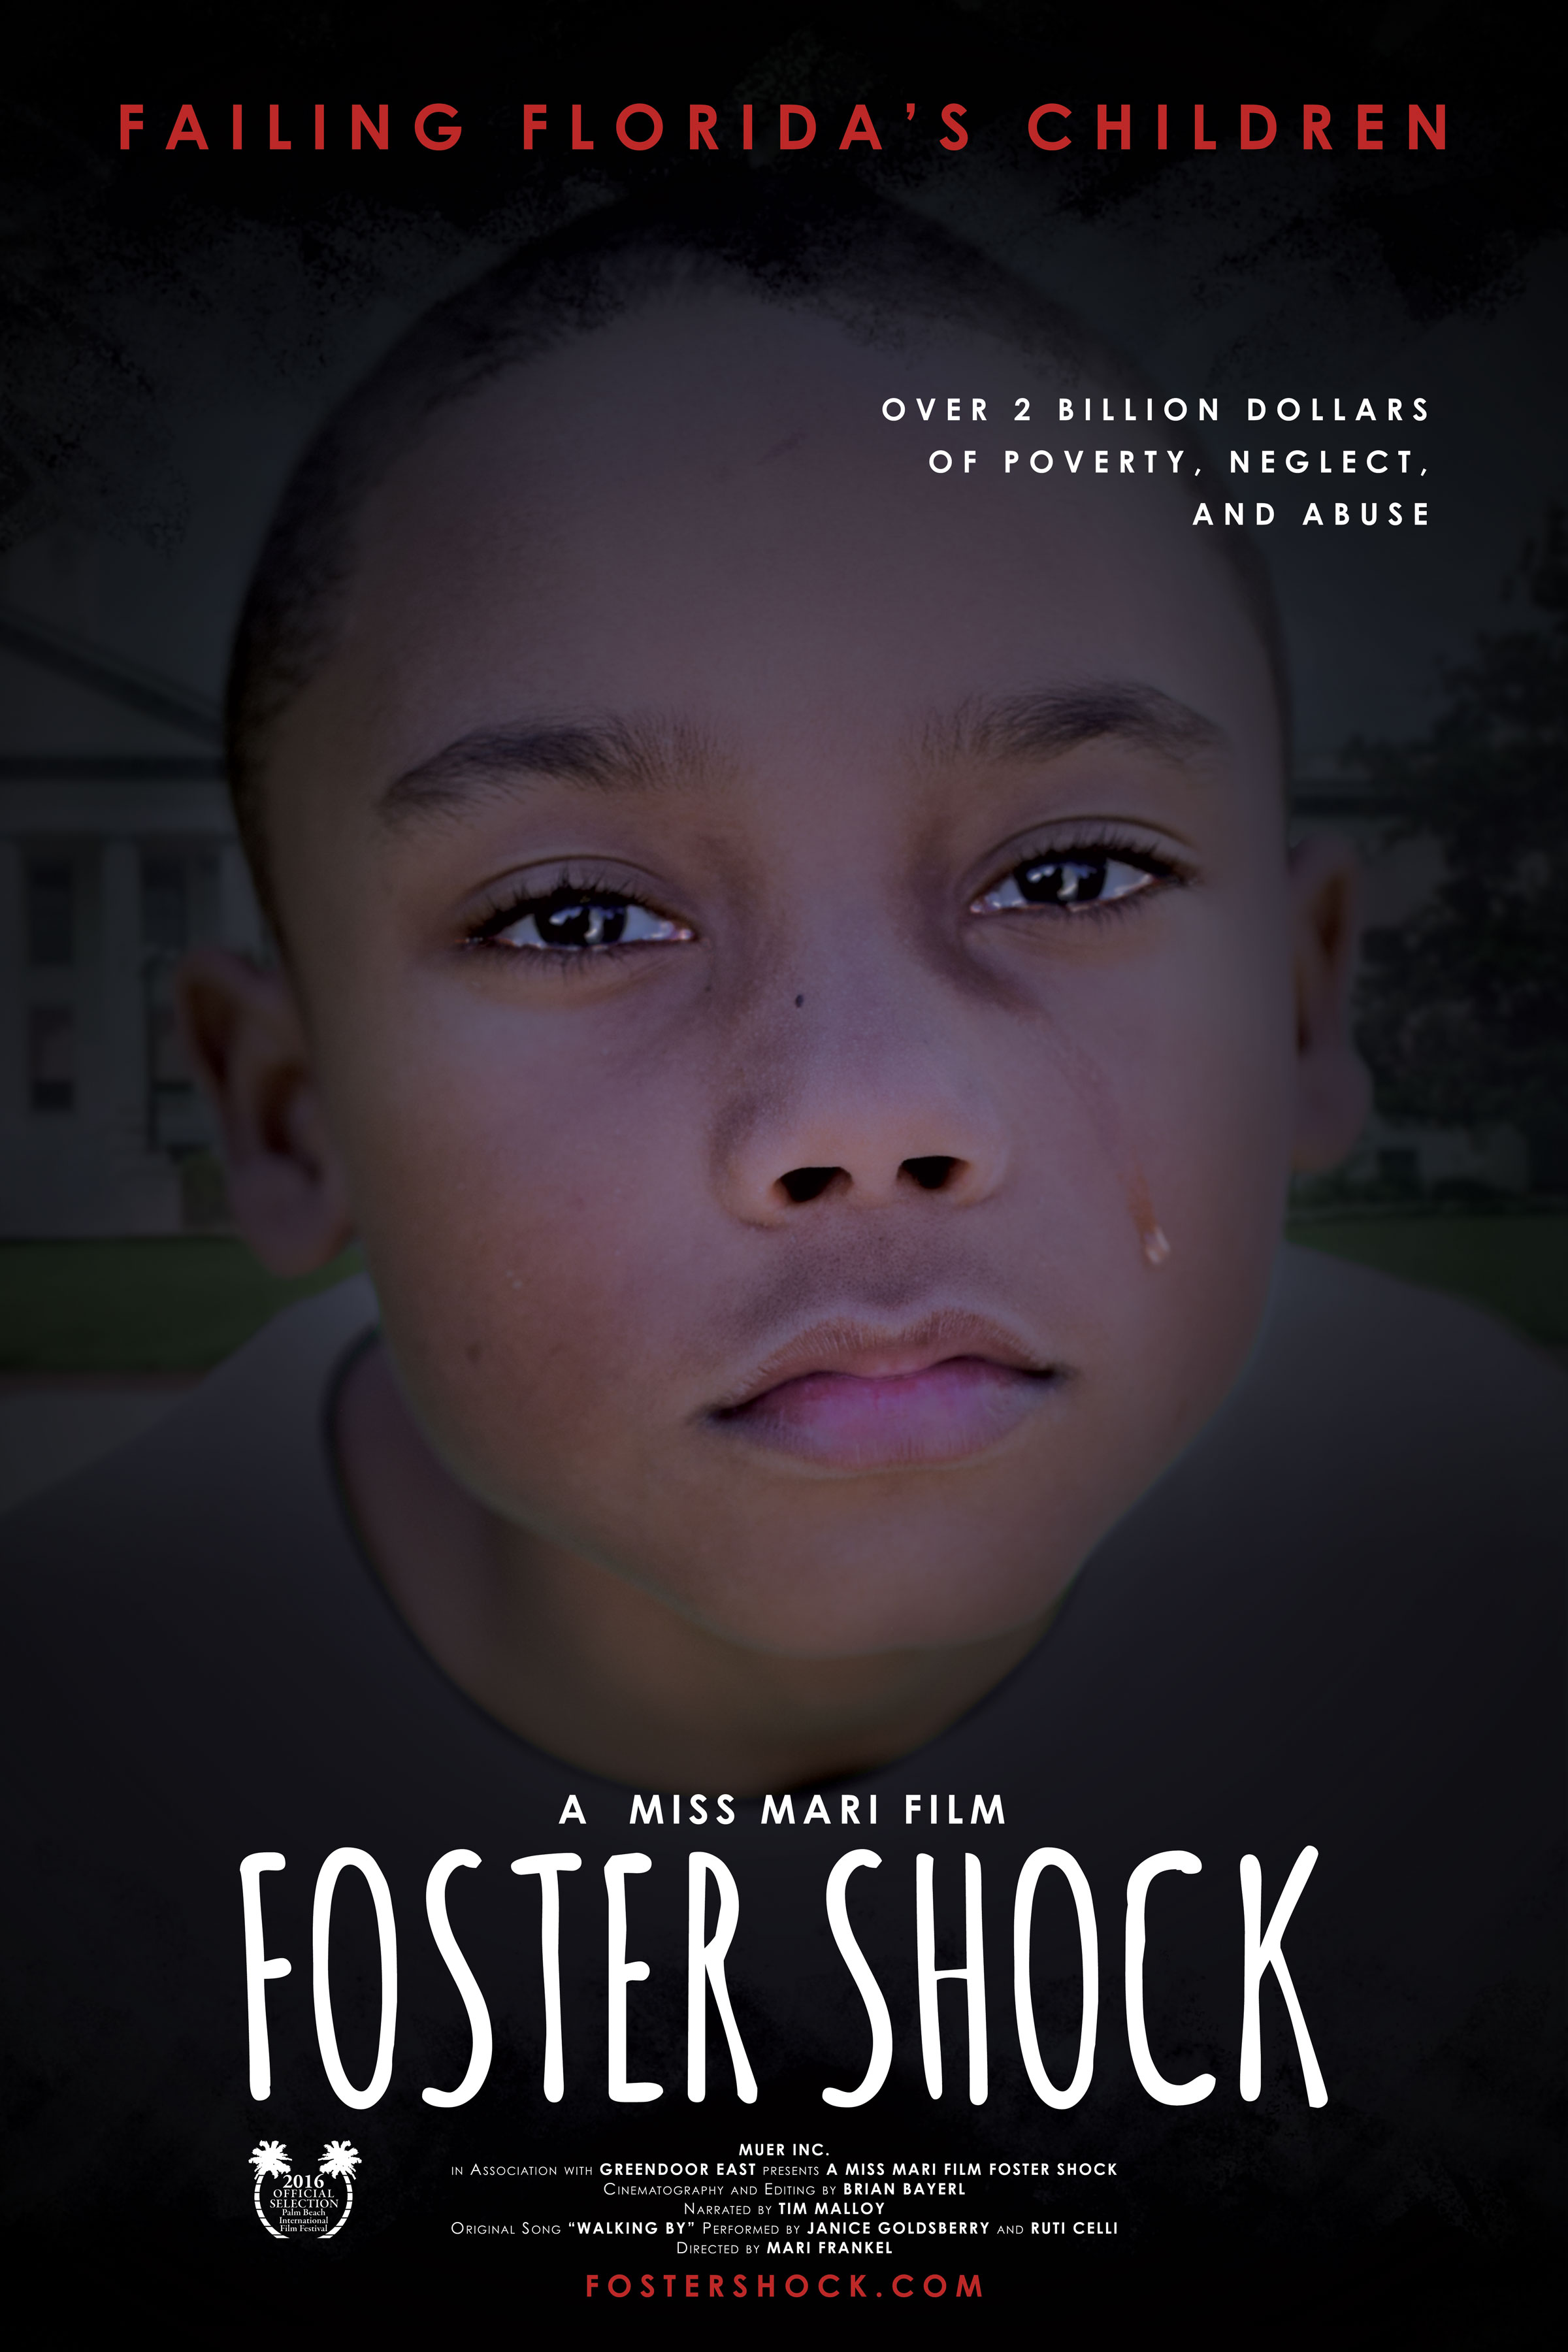 The Official Movie Poster for Foster Shock